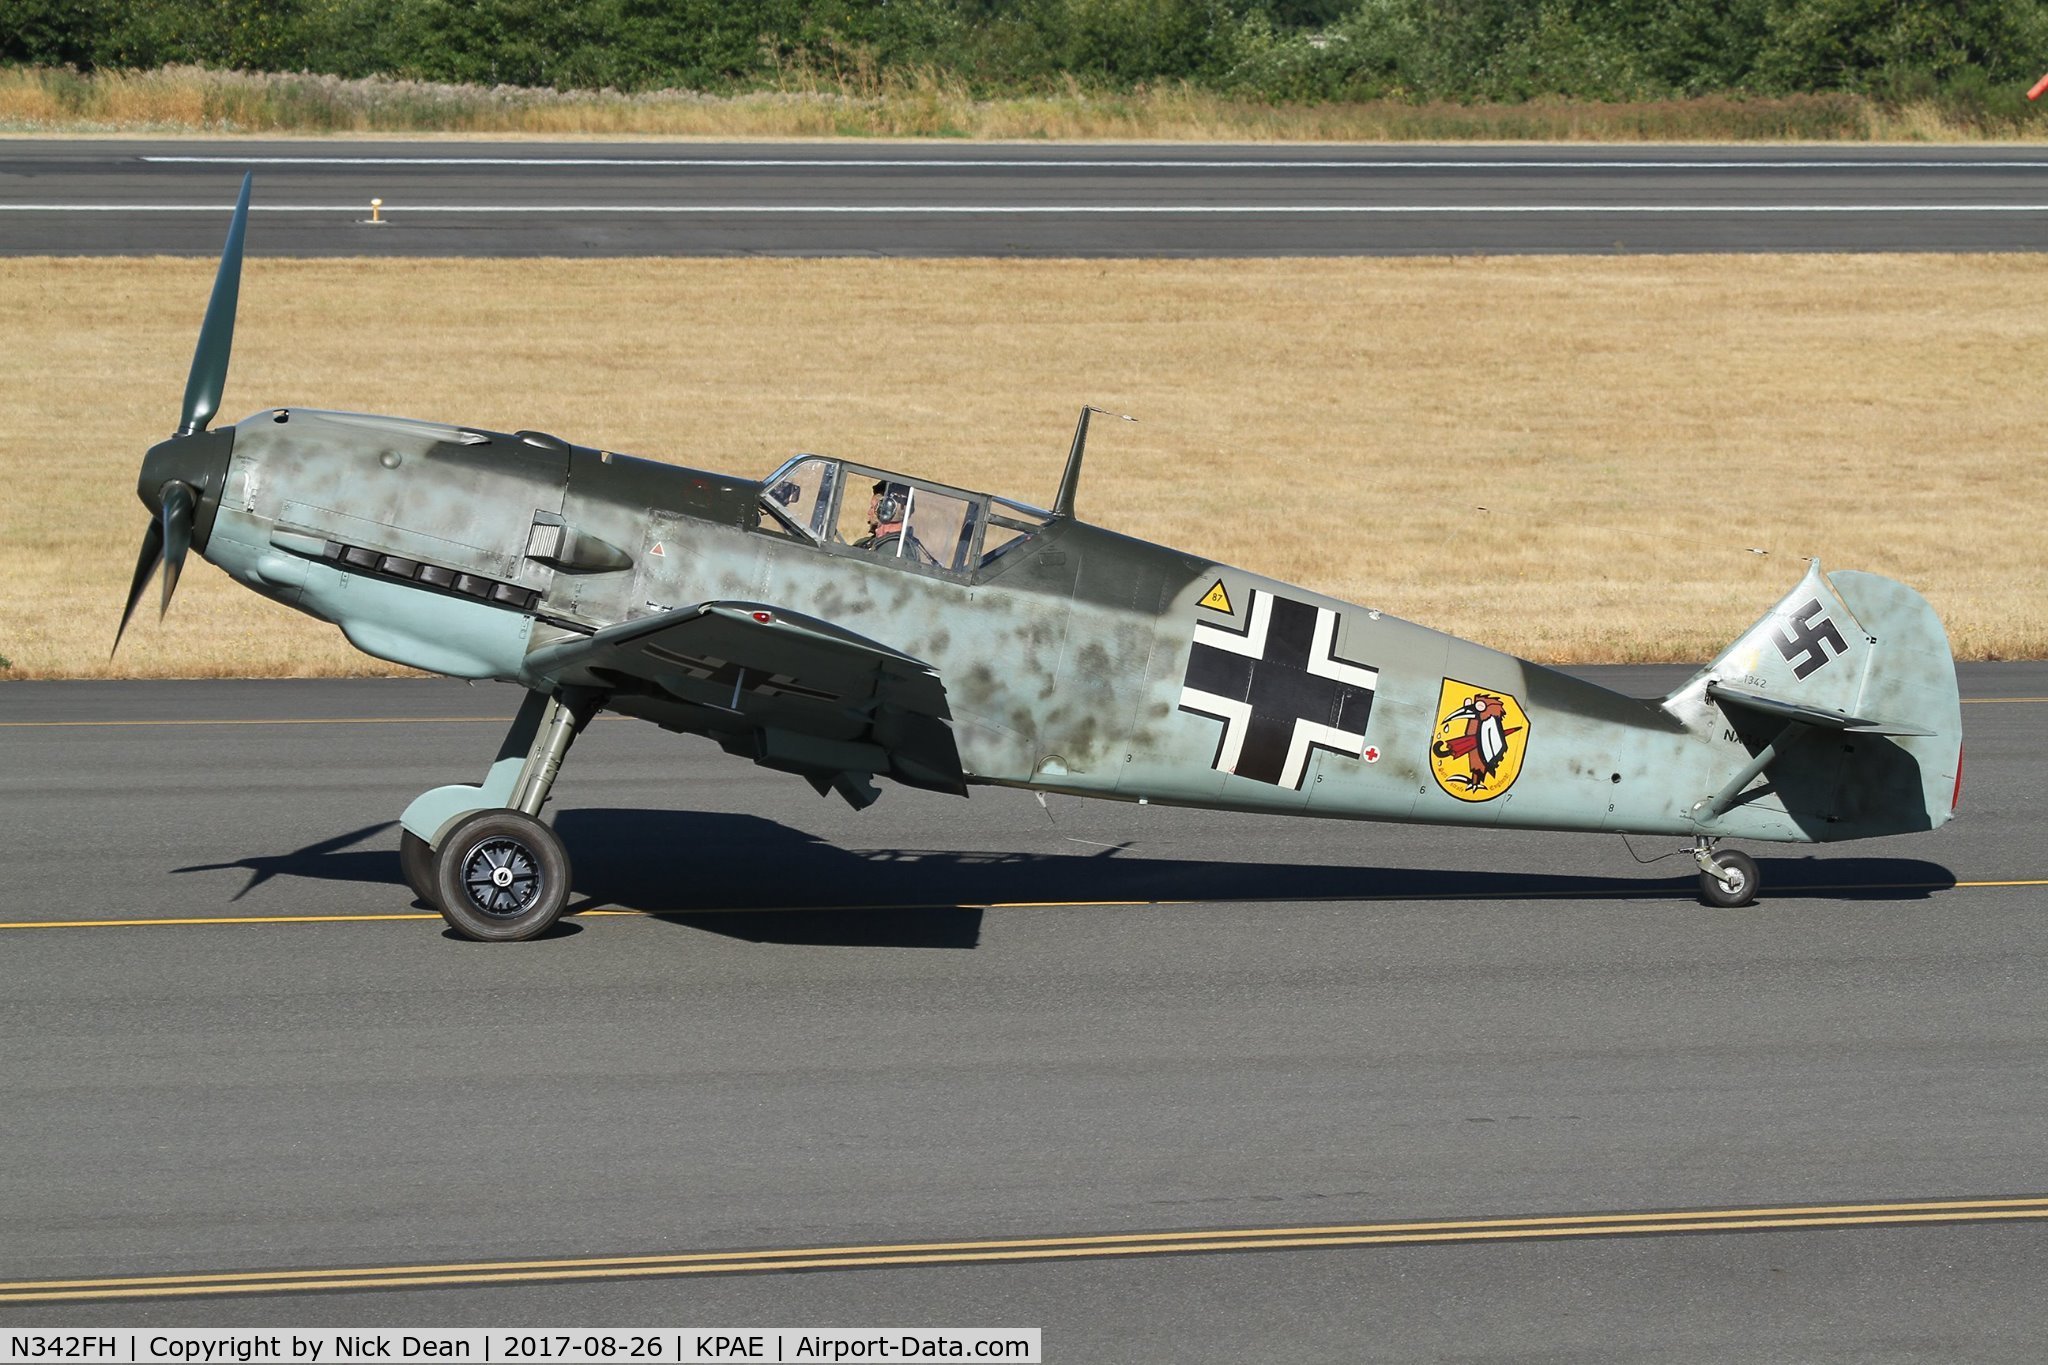 N342FH, 1939 Messerschmitt Bf-109E C/N 1342, Part of the FHCAM museum collection.